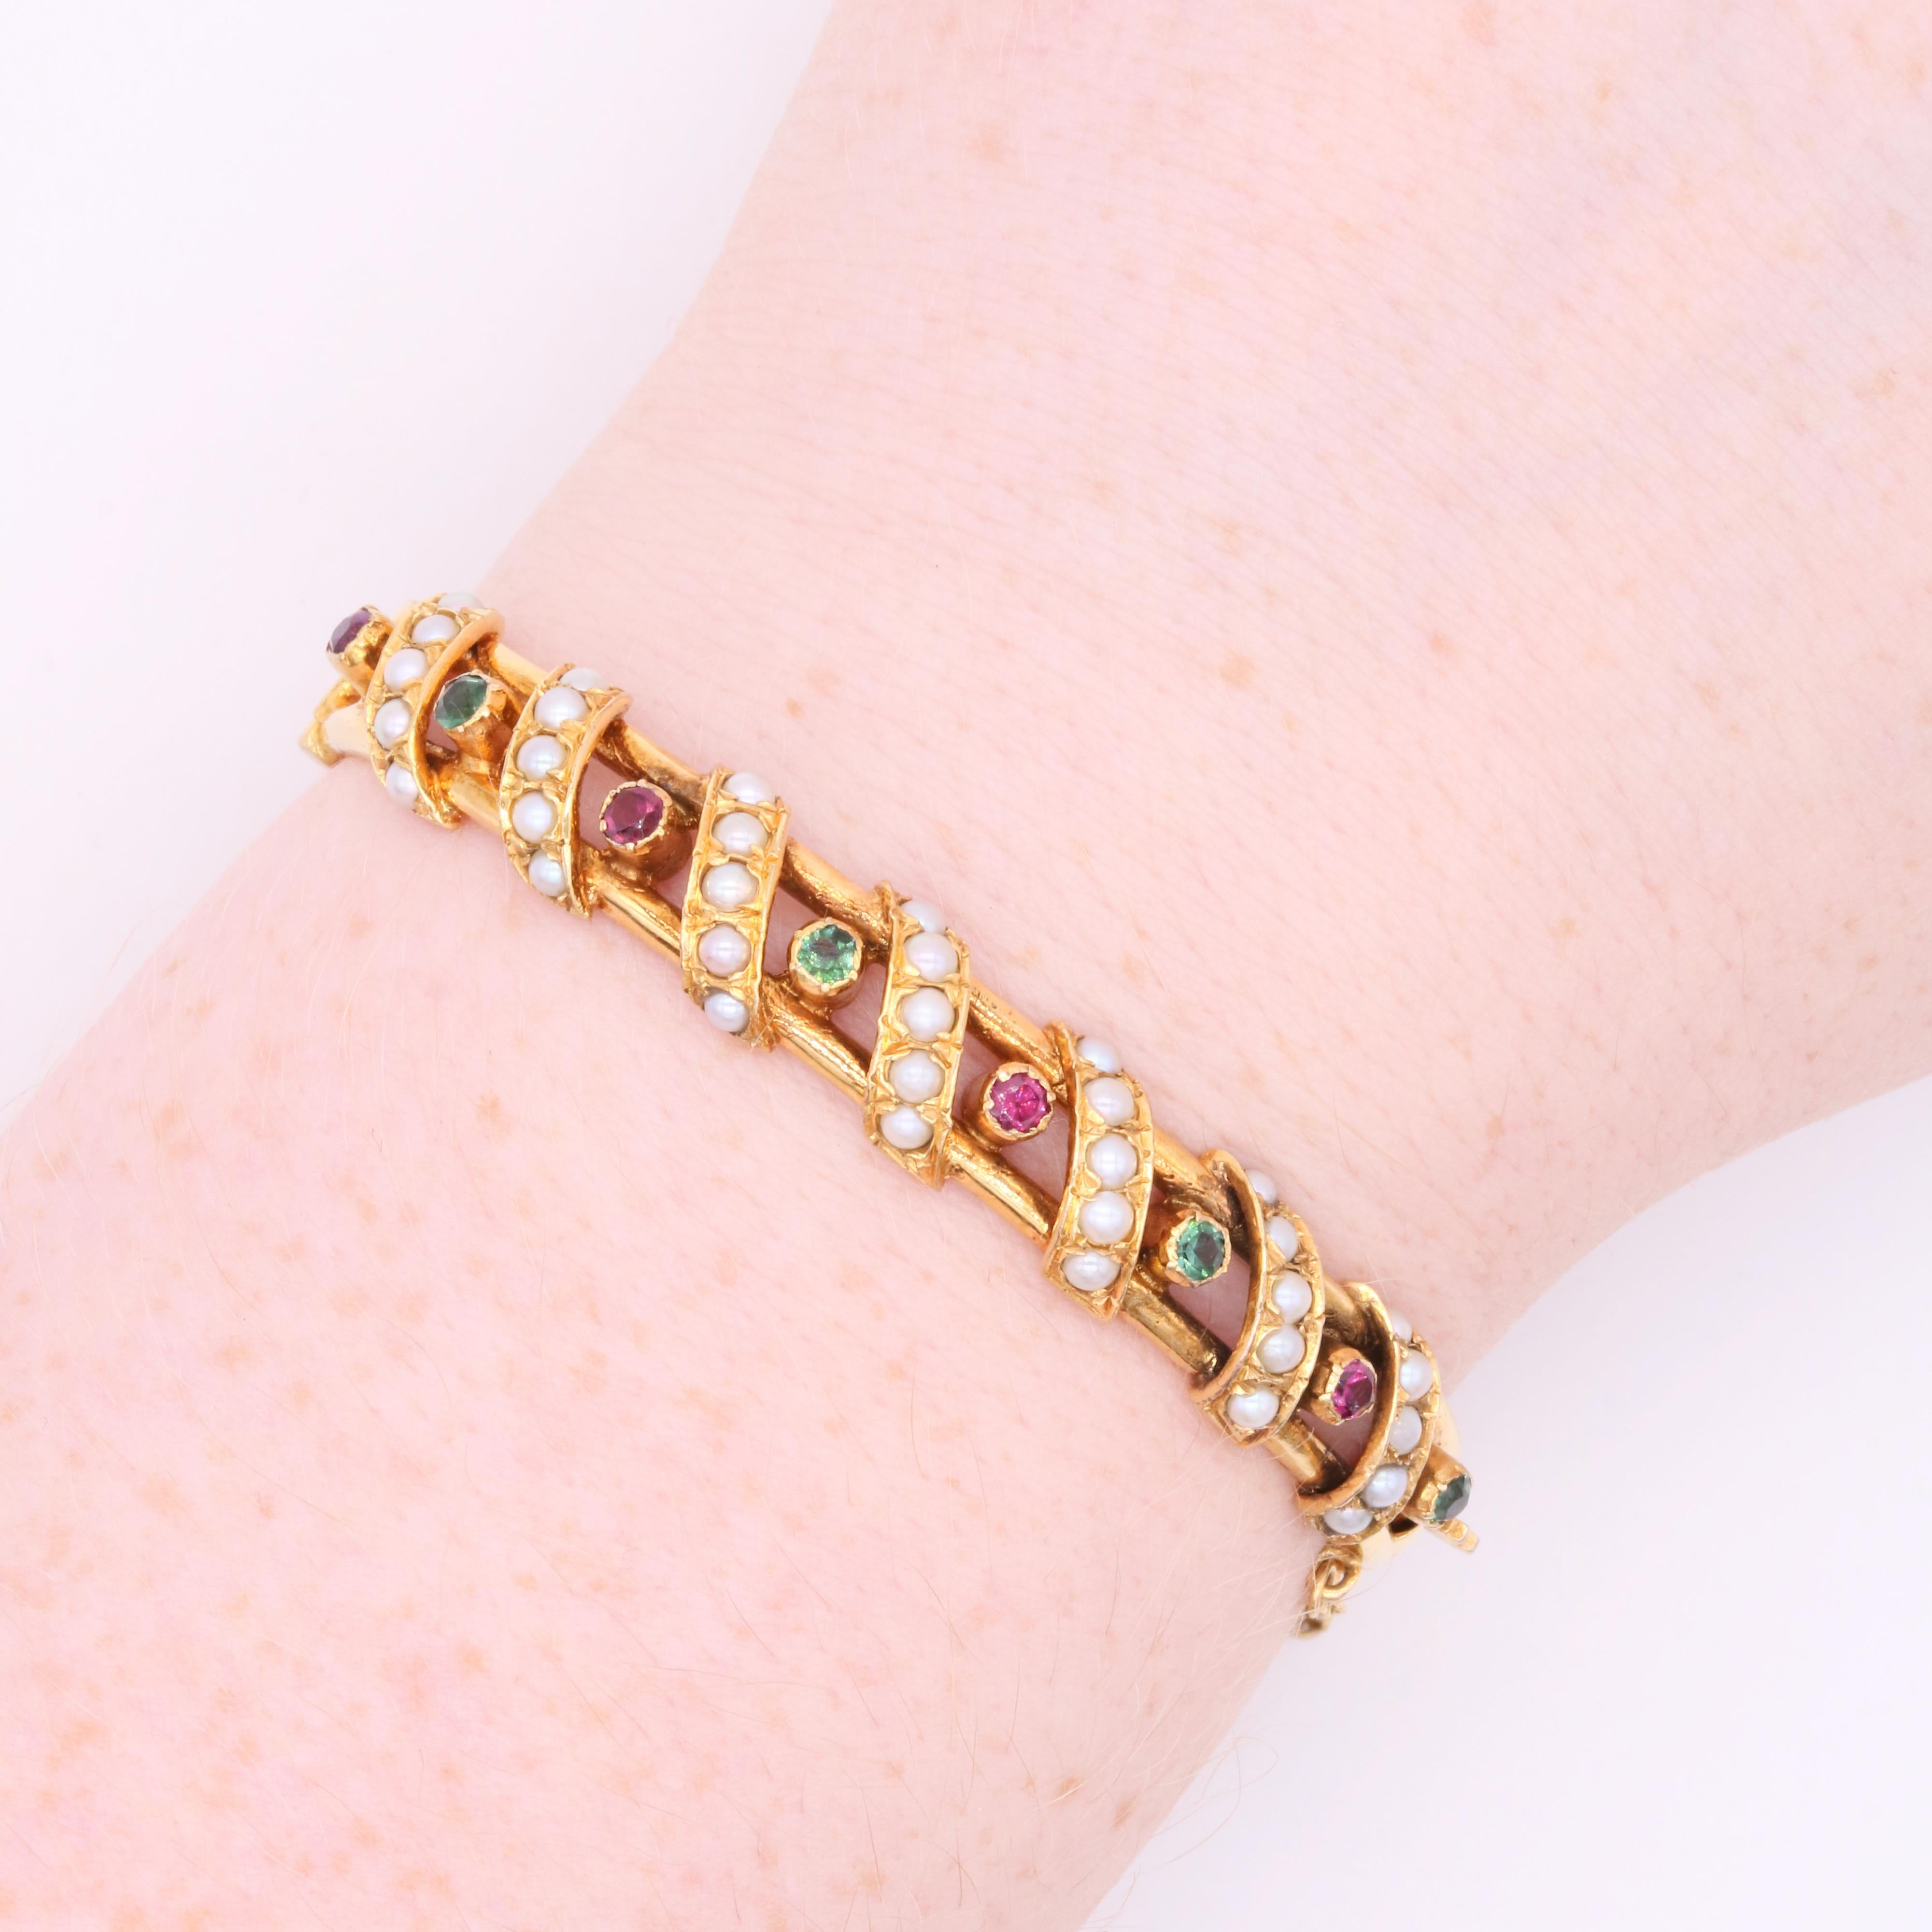 An antique rhodolite garnet, peridot, and pearl bracelet in yellow gold, comprising four rhodolite garnets, four peridots and thirty-five seed pearls, set in 18 karat yellow gold, to a bracelet of 18 karat yellow gold. 

The bracelet is crafted